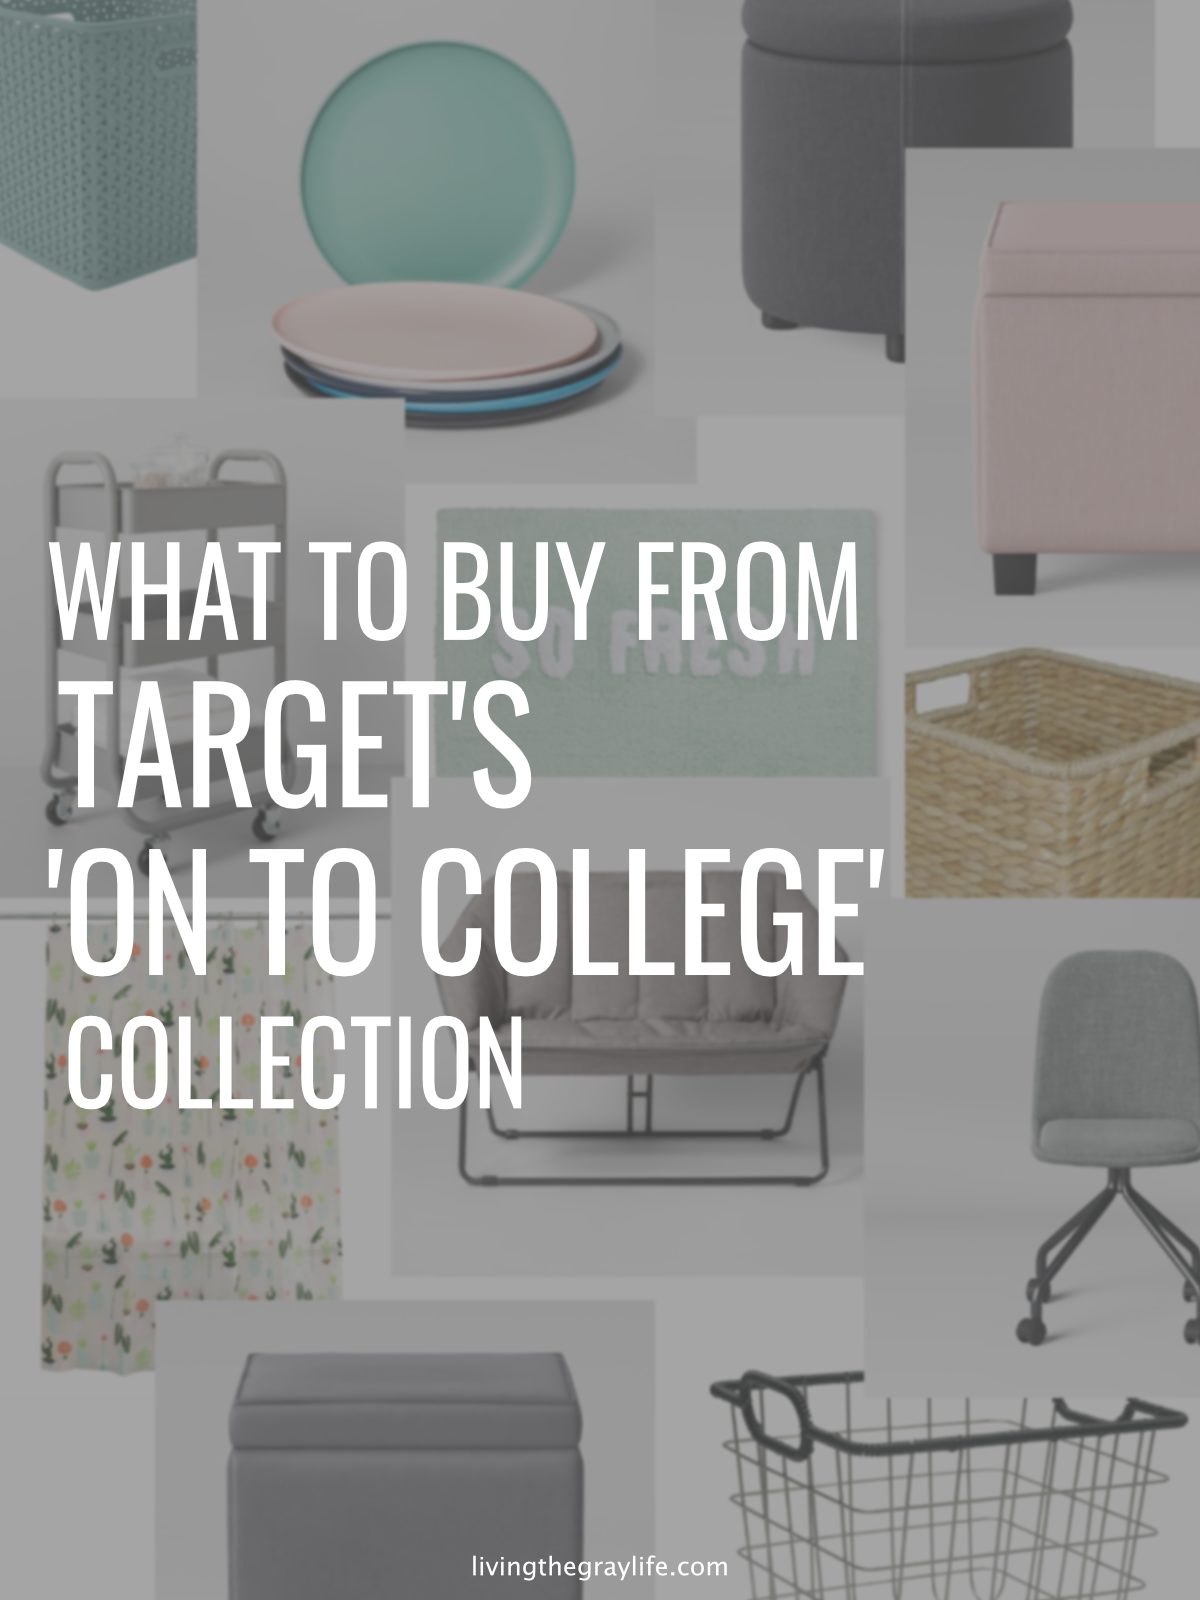 Here’s What You Really Need from Target’s ‘On to College’ Collection